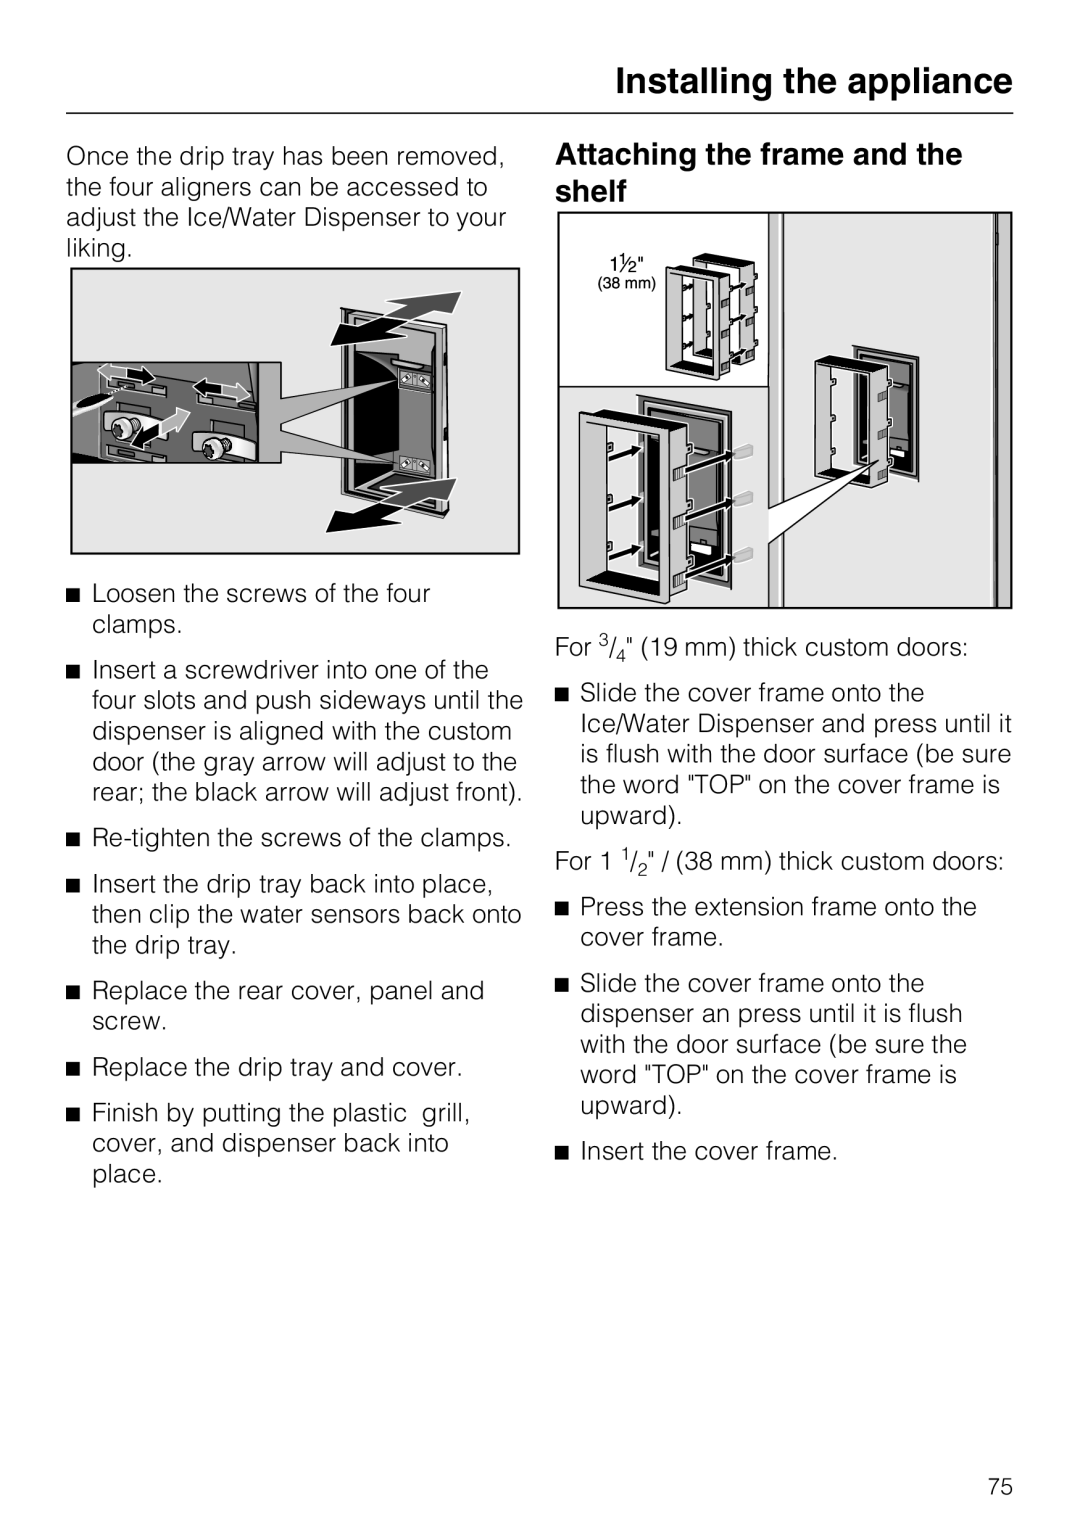 Miele F1471VI installation instructions Attaching the frame and the shelf, Installing the appliance 